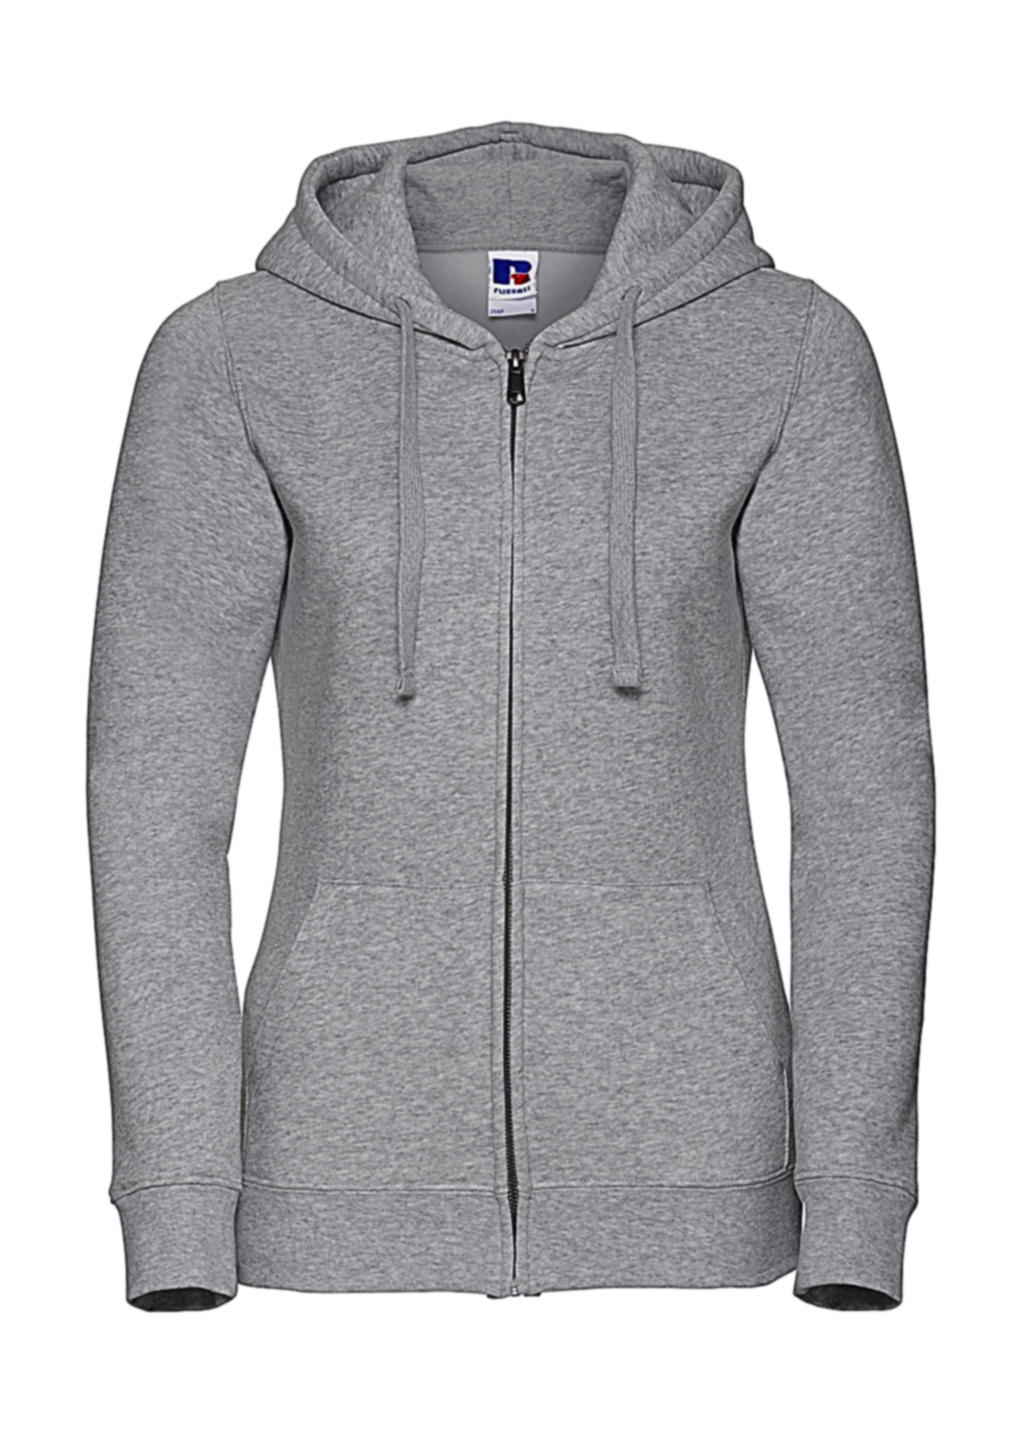  Ladies Authentic Zipped Hood in Farbe Light Oxford